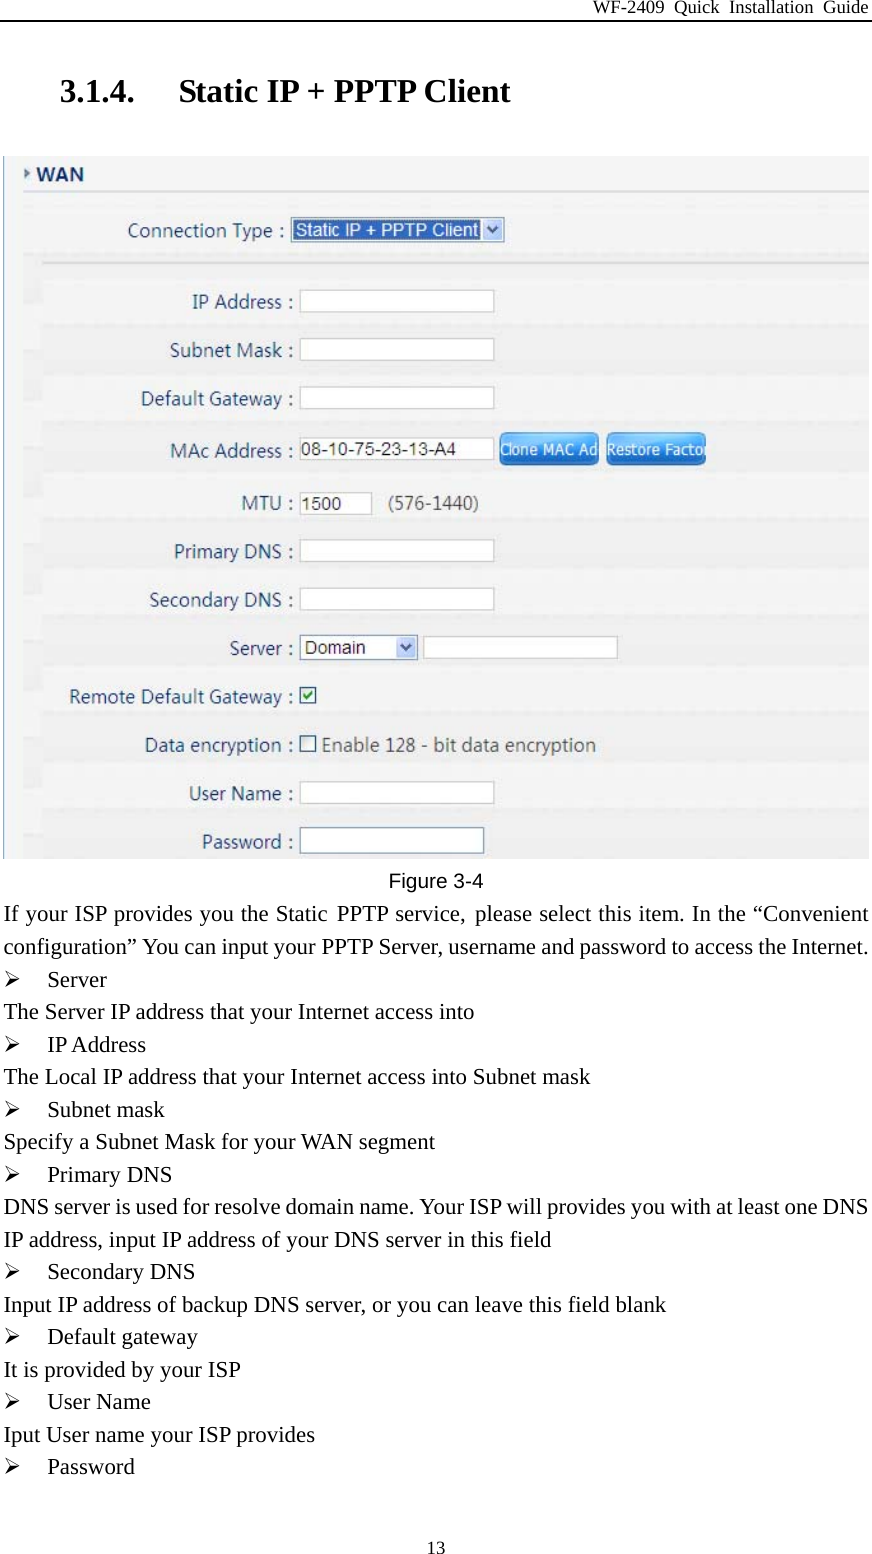 WF-2409 Quick Installation Guide  133.1.4. Static IP + PPTP Client  Figure 3-4 If your ISP provides you the Static PPTP service, please select this item. In the “Convenient configuration” You can input your PPTP Server, username and password to access the Internet.  Server The Server IP address that your Internet access into  IP Address The Local IP address that your Internet access into Subnet mask  Subnet mask Specify a Subnet Mask for your WAN segment  Primary DNS DNS server is used for resolve domain name. Your ISP will provides you with at least one DNS IP address, input IP address of your DNS server in this field  Secondary DNS Input IP address of backup DNS server, or you can leave this field blank  Default gateway It is provided by your ISP  User Name Iput User name your ISP provides  Password 